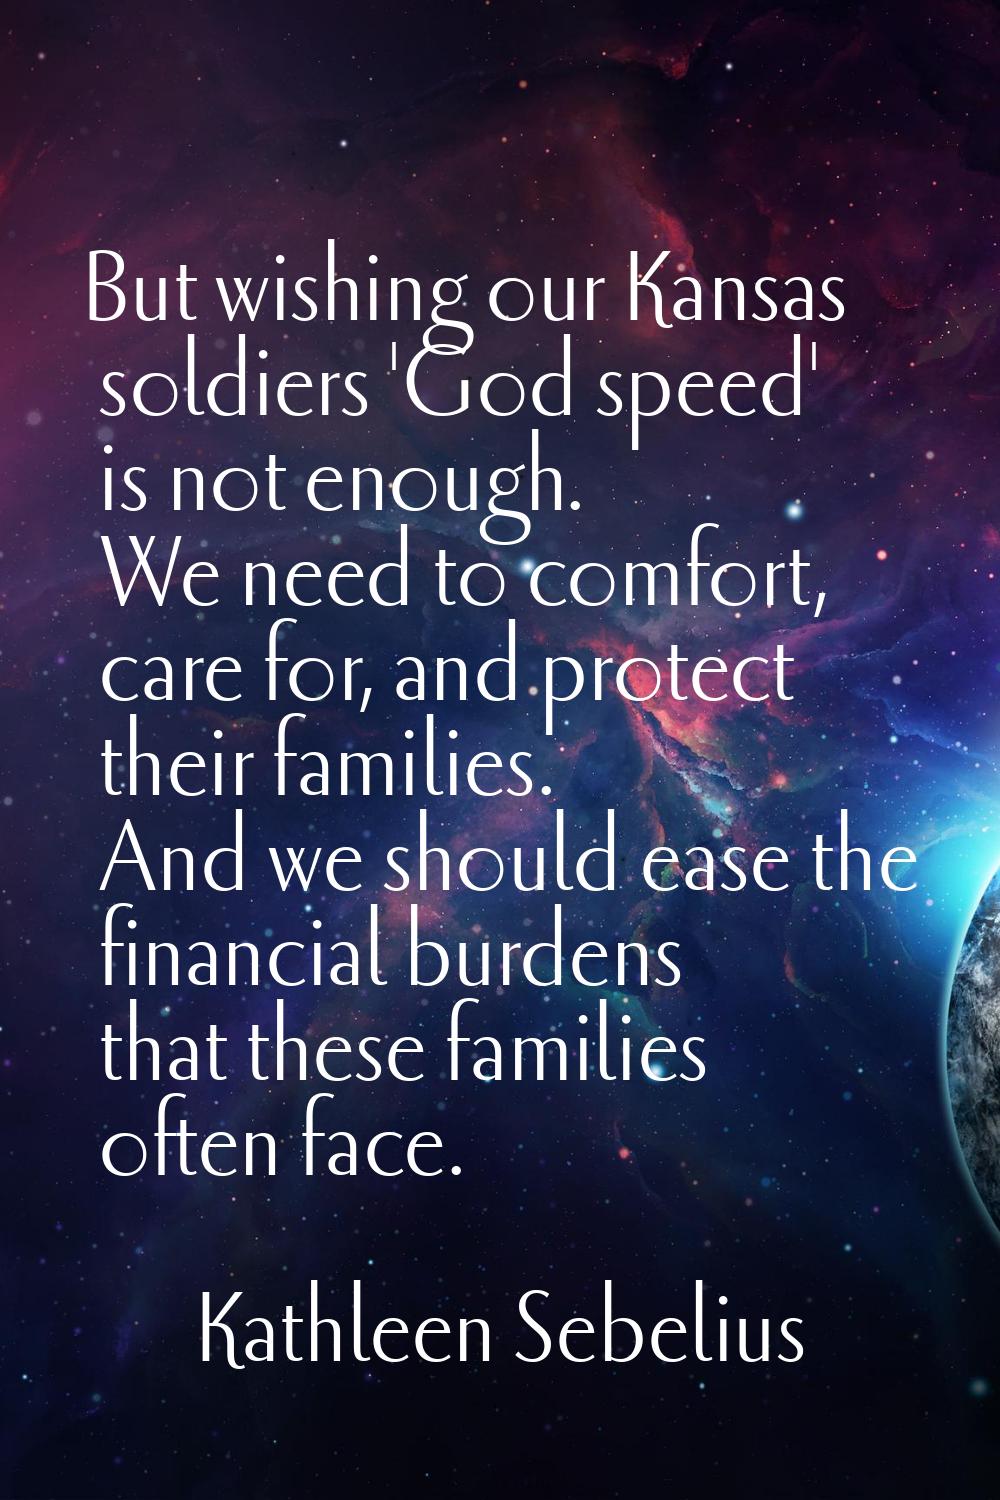 But wishing our Kansas soldiers 'God speed' is not enough. We need to comfort, care for, and protec